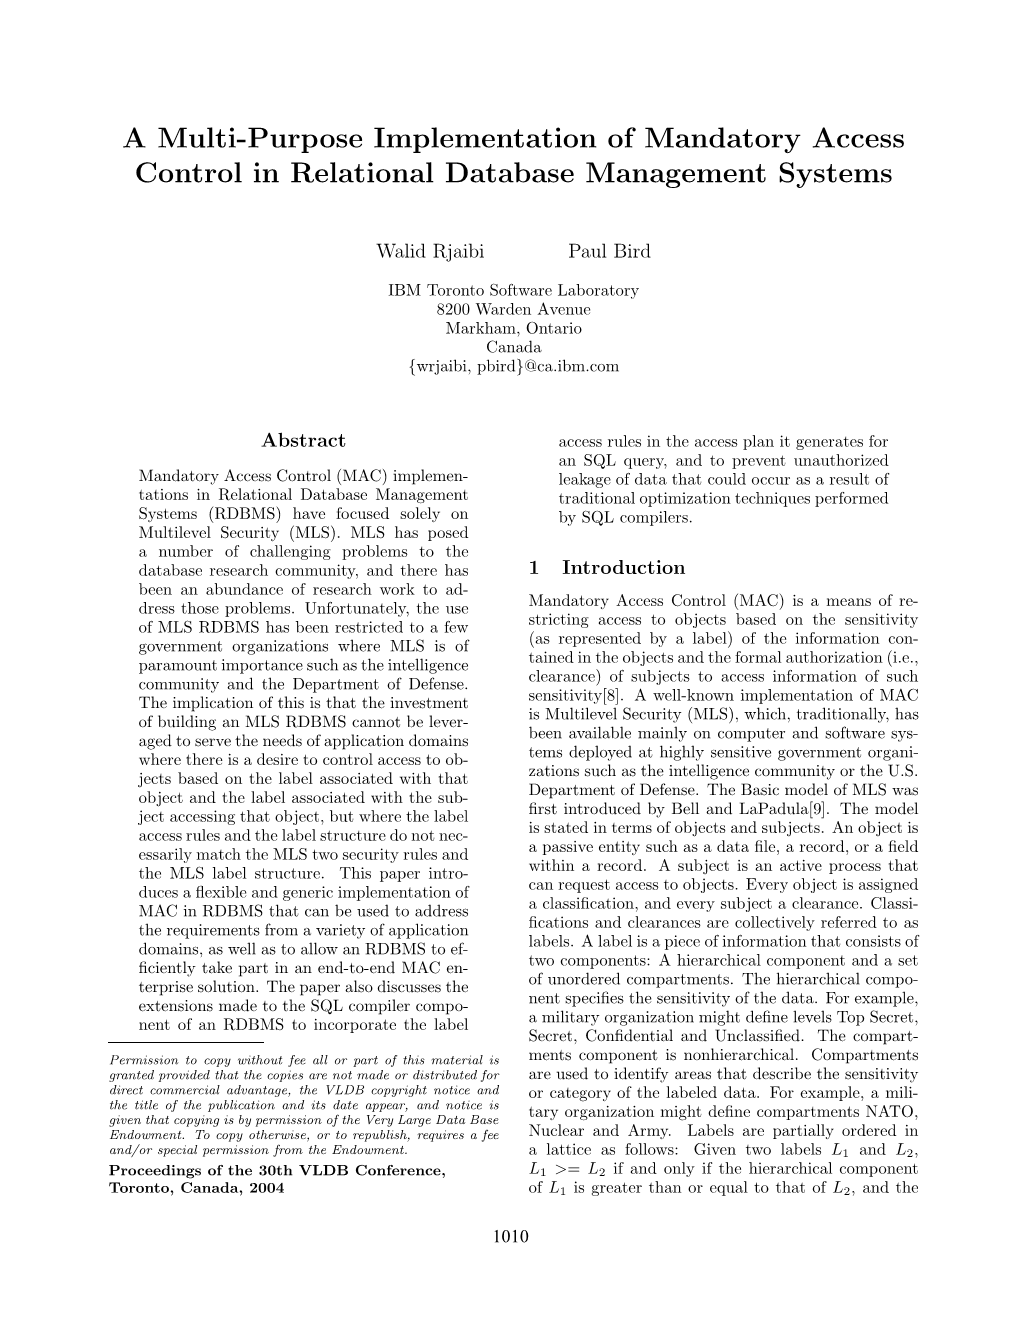 A Multi-Purpose Implementation of Mandatory Access Control in Relational Database Management Systems